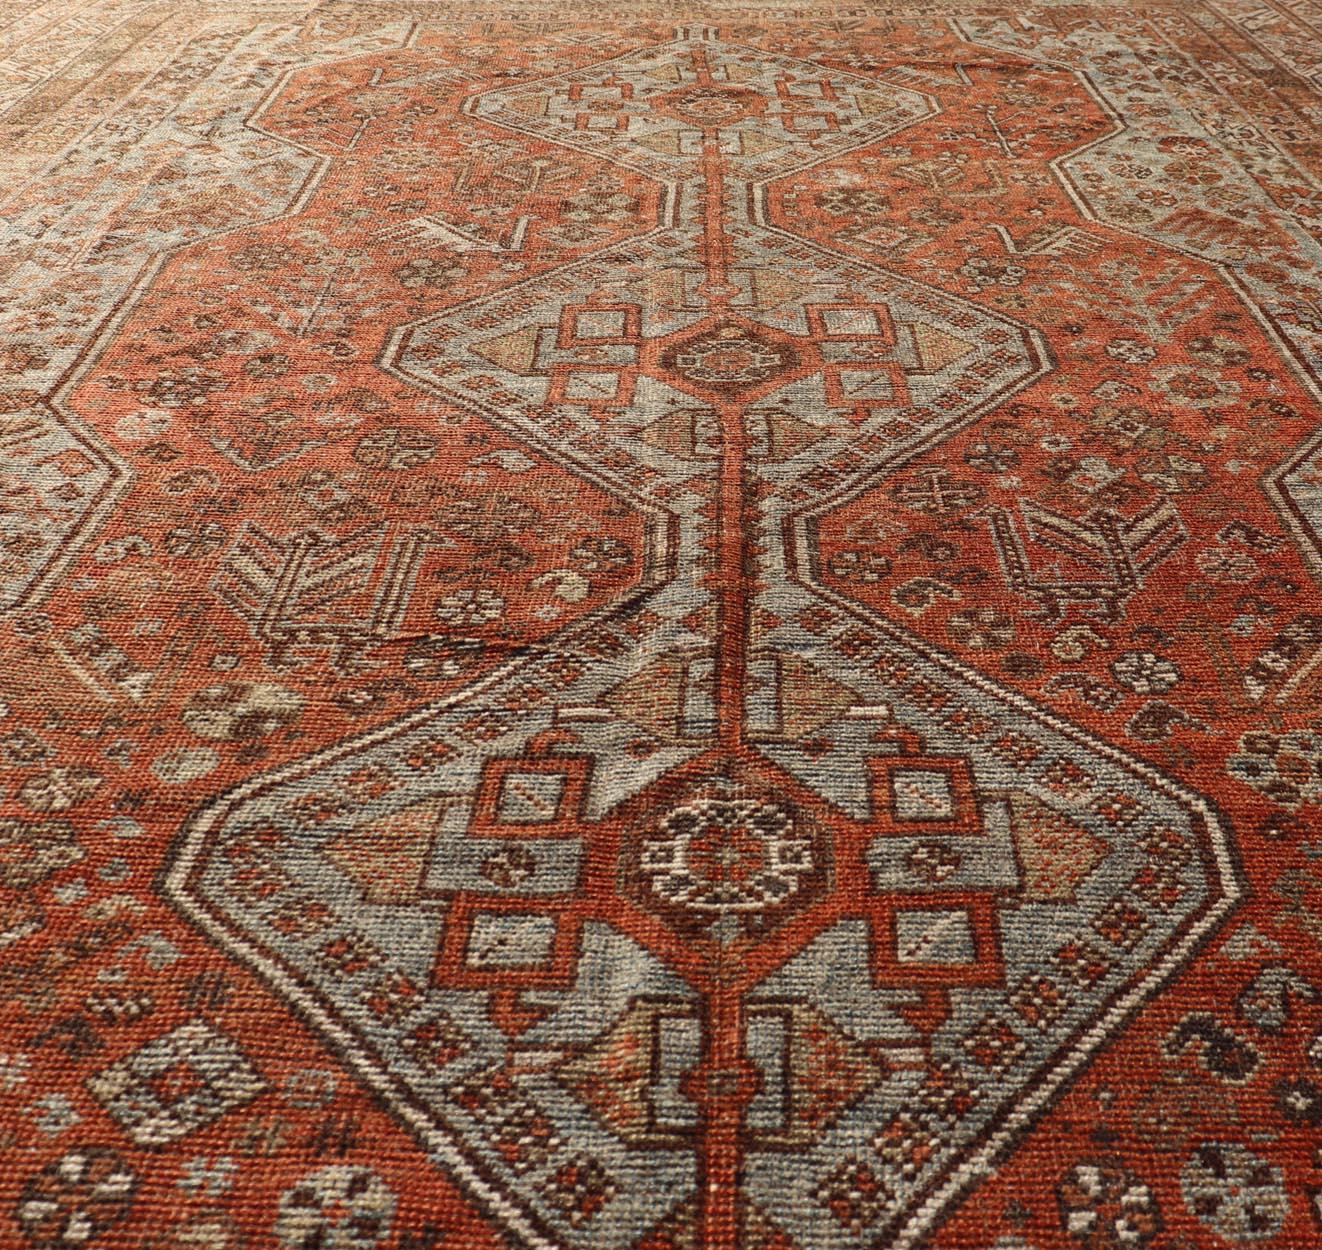 Antique Persian Shiraz Rug With Medallions Geometric in Rusty Orange, Steel Blue For Sale 2